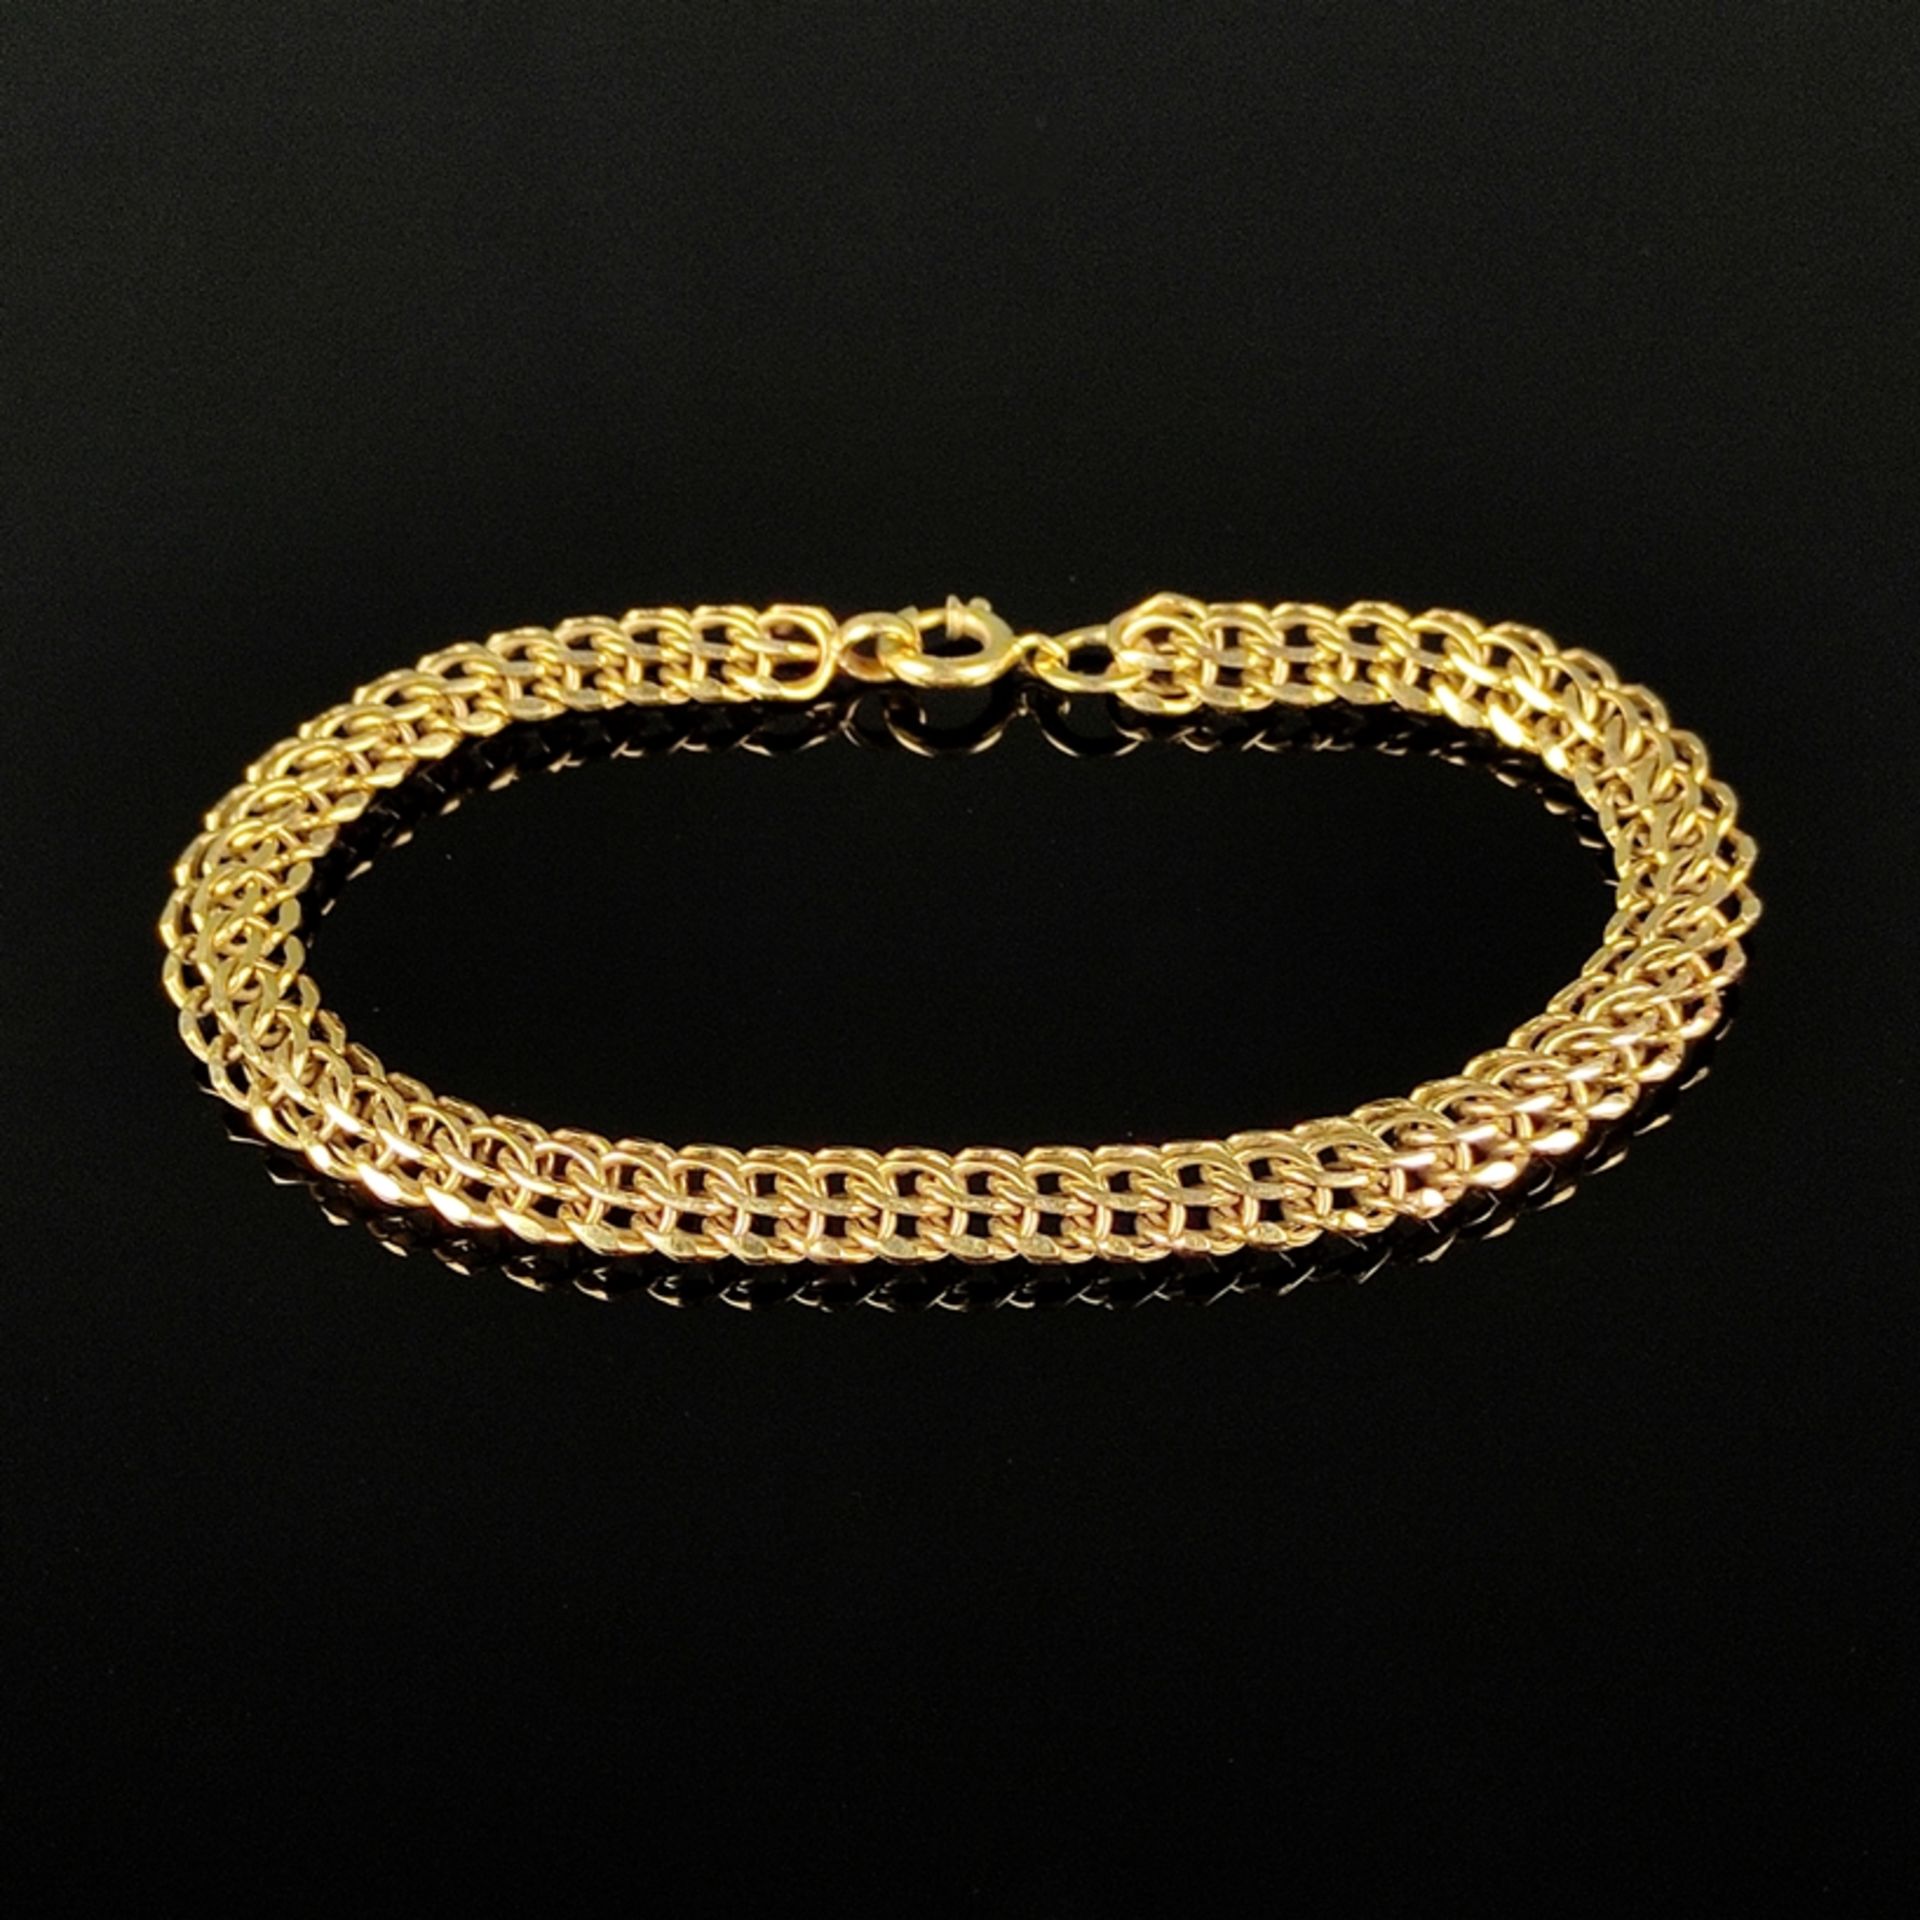 Bracelet, 585/14K yellow gold (hallmarked), 16,17g, flexible band made of different ring-shaped ele